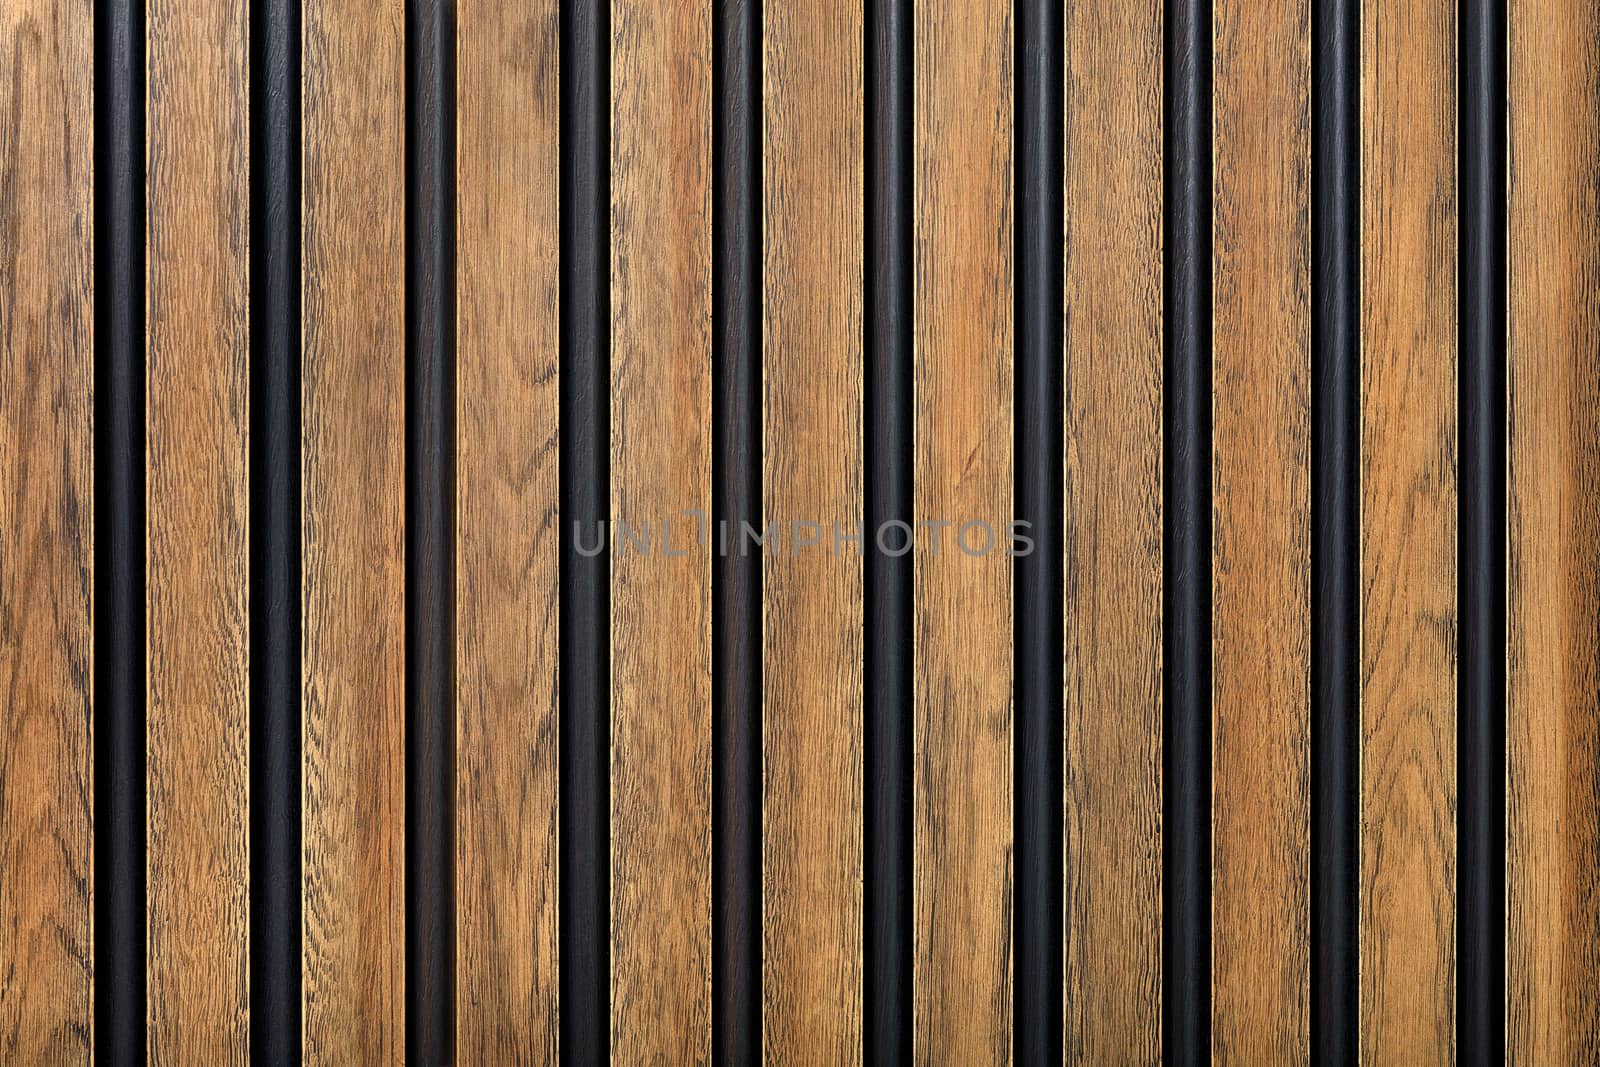 A wooden fence made of vertical decorative planks with a pronounced texture of light brown color with black spaces.